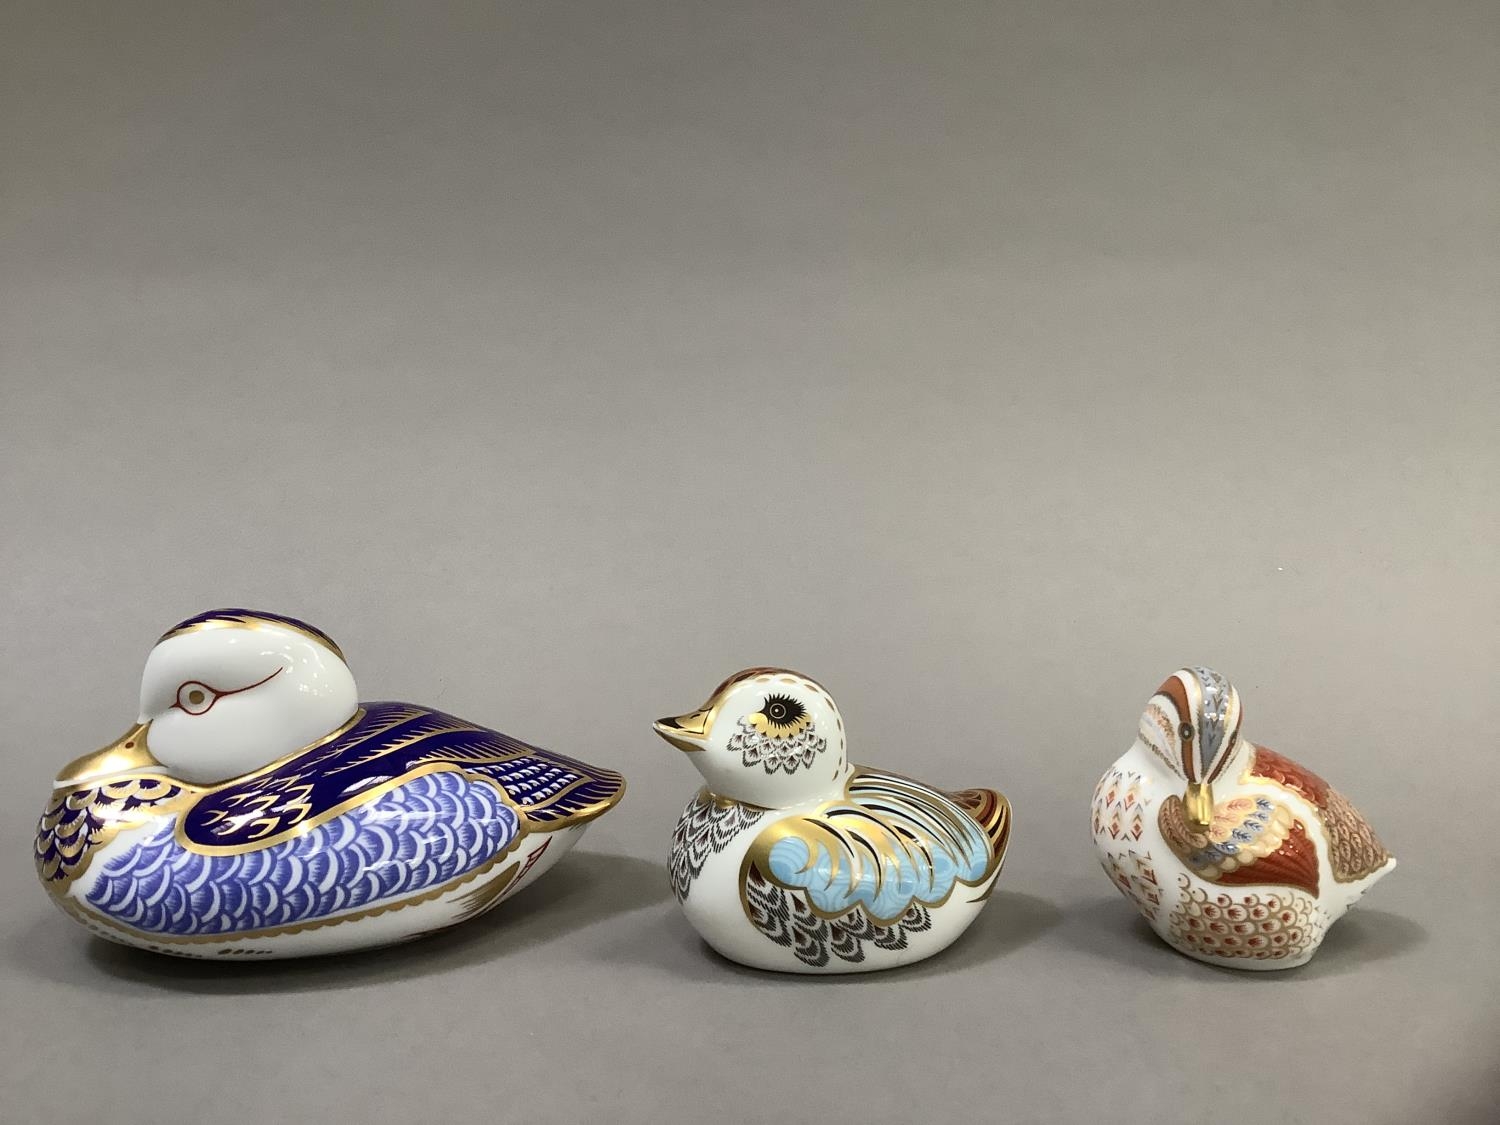 A Royal Crown Derby duck, silver button, collectors guild duckling with gold button and a teal